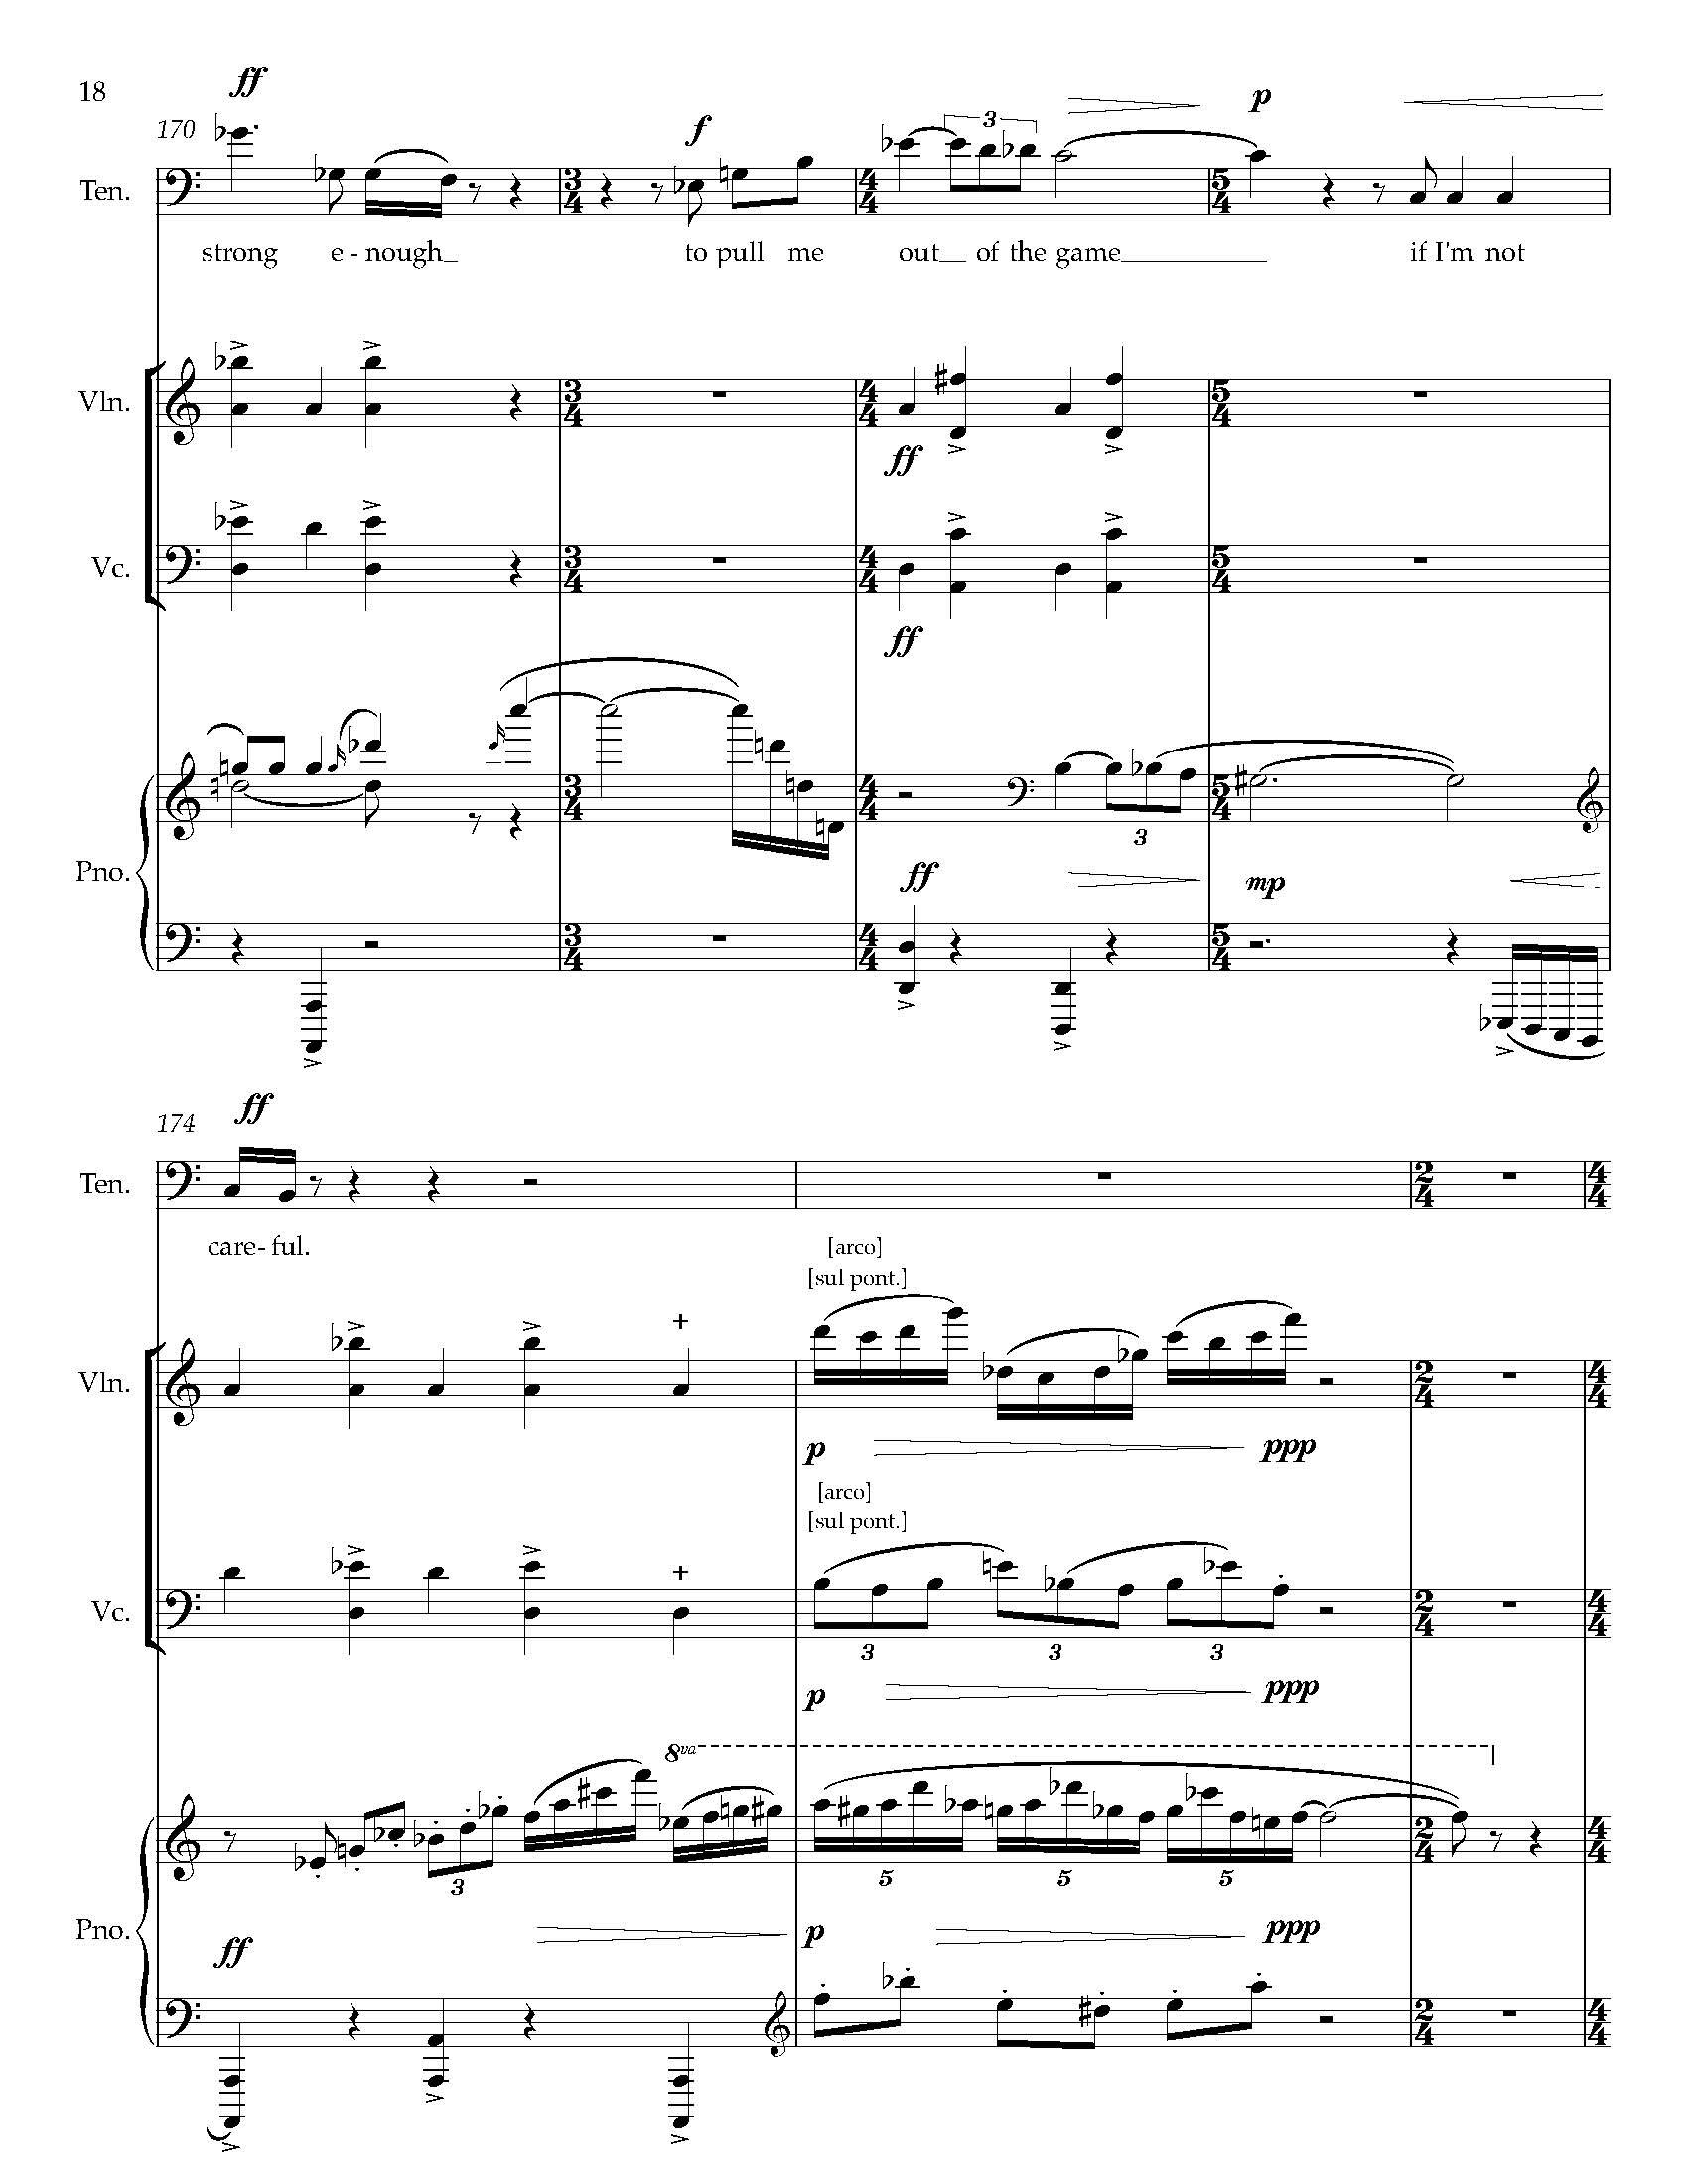 Gursky Songs - Complete Score_Page_26.jpg